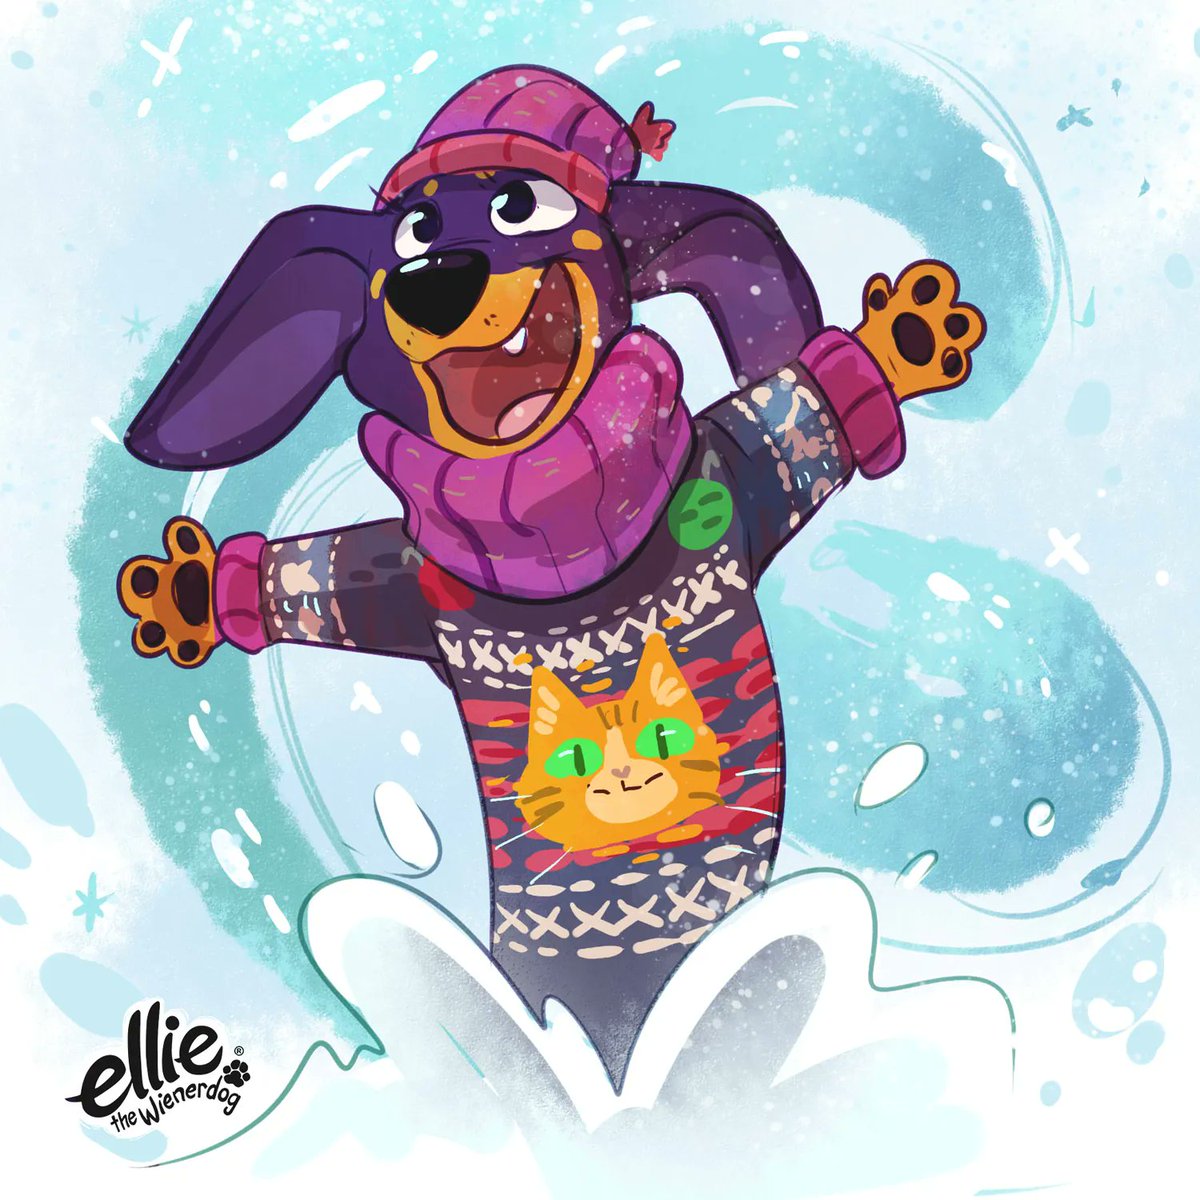 Bust out your ugly sweaters and hot cocoa! ITS THE FIRST DAY OF WINTER! 🐾❄️🐾 #winterbegins #uglysweater #elliethewienerdog #purplewienerdog